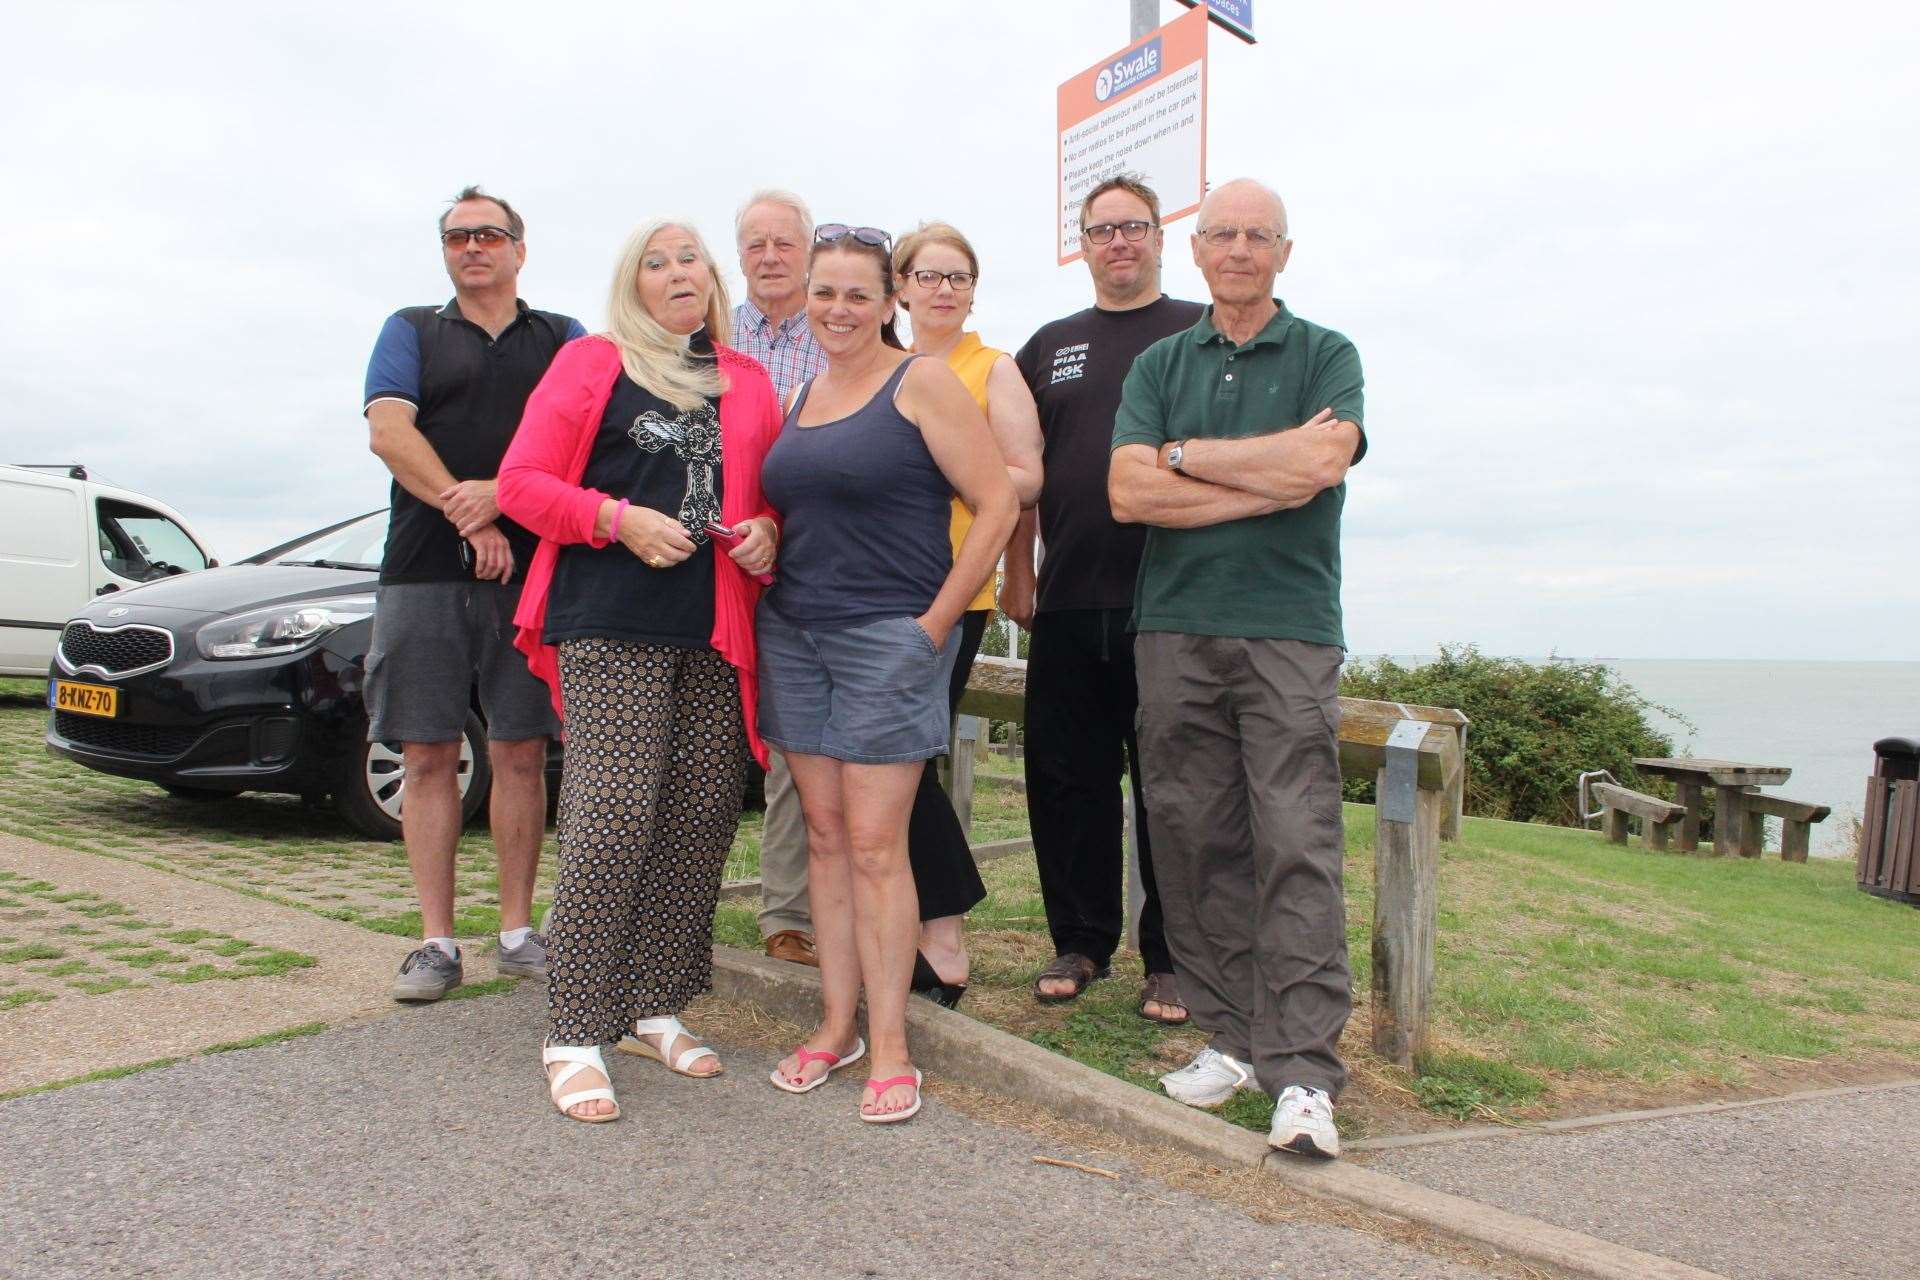 Residents have had enough of loud noise at Swale council's car park on the cliffs at Seathorpe Avenue, Minster, Sheppey (12433582)